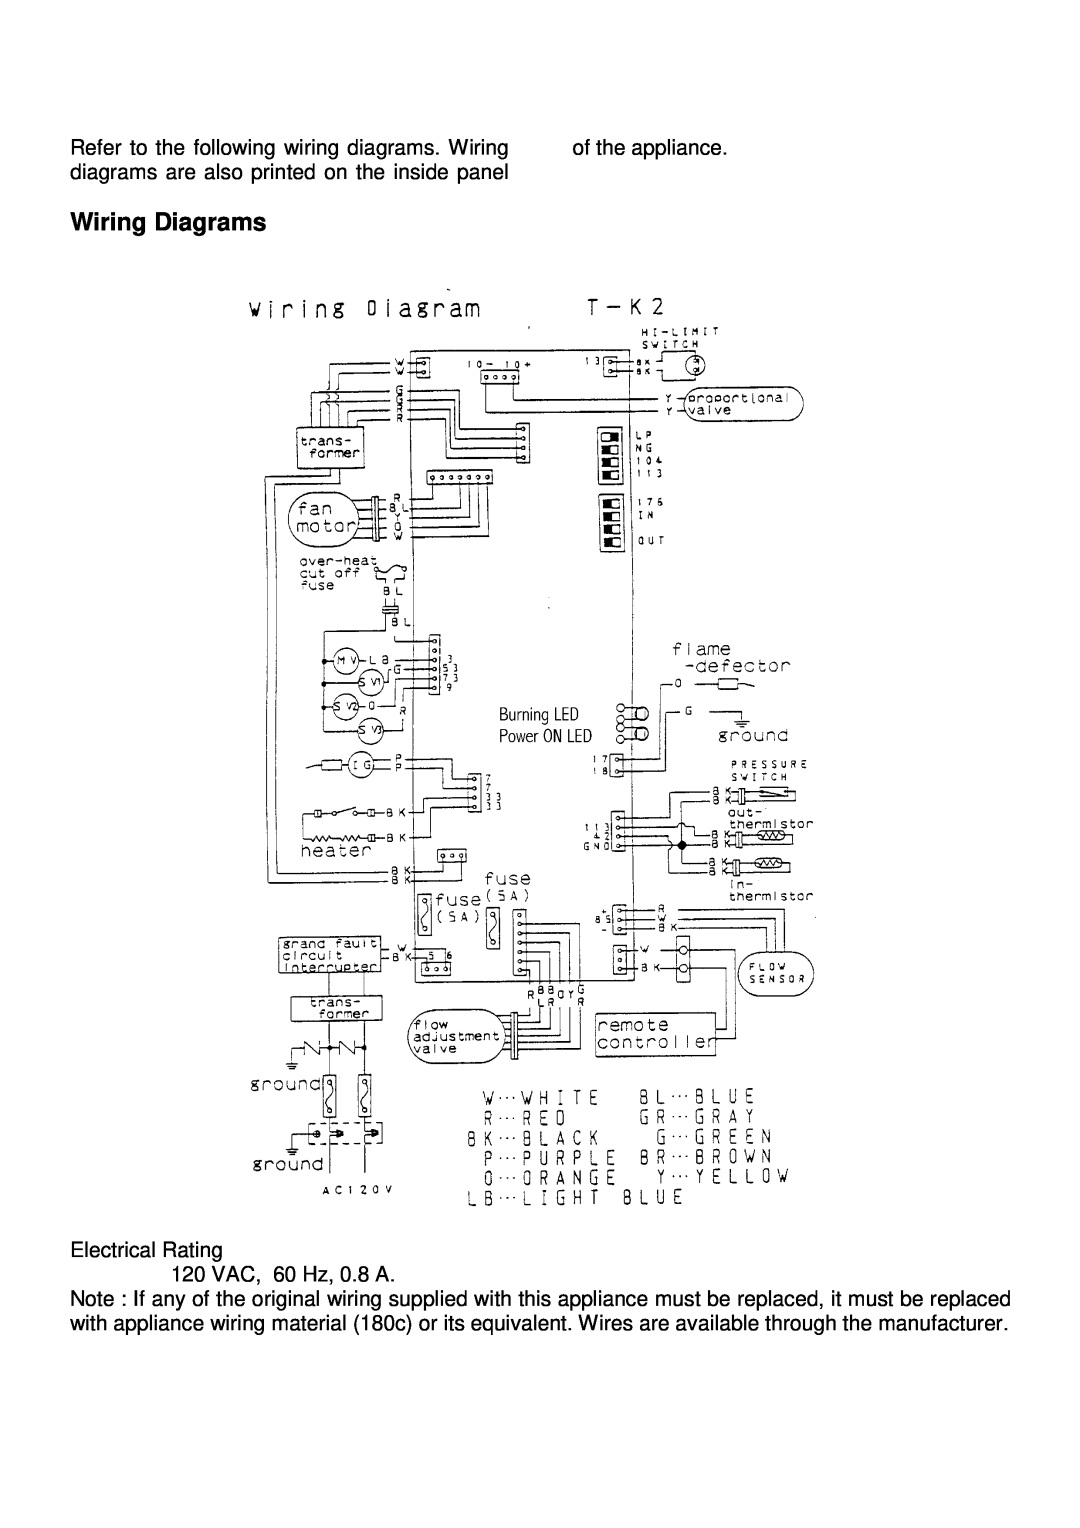 Whirlpool T-K2 installation manual Wiring Diagrams, Refer to the following wiring diagrams. Wiring, of the appliance 